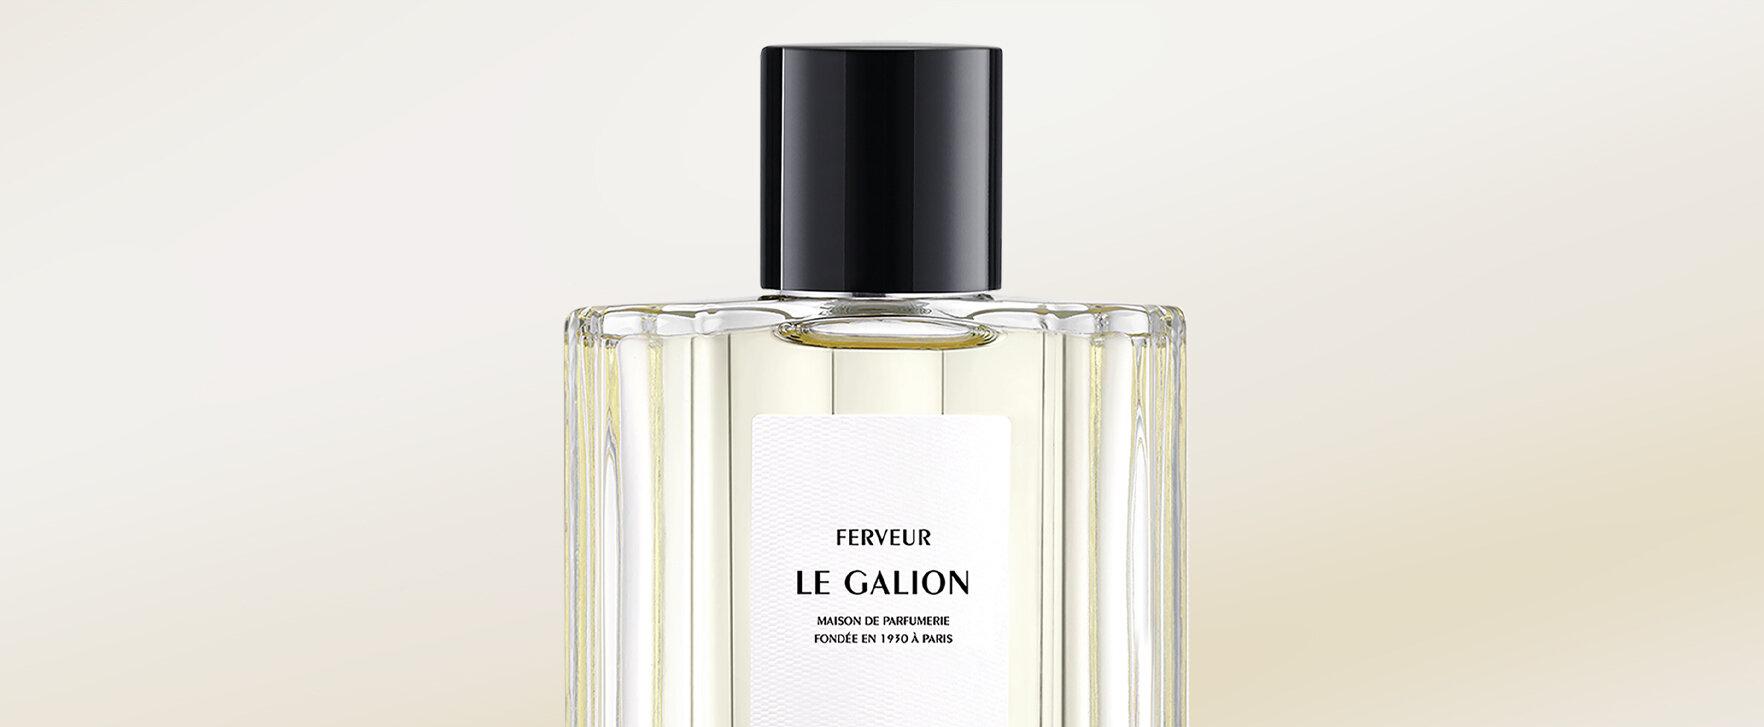 “Ferveur” - New Perfume From Le Galion as a Tribute to Perfumer Paul Vacher